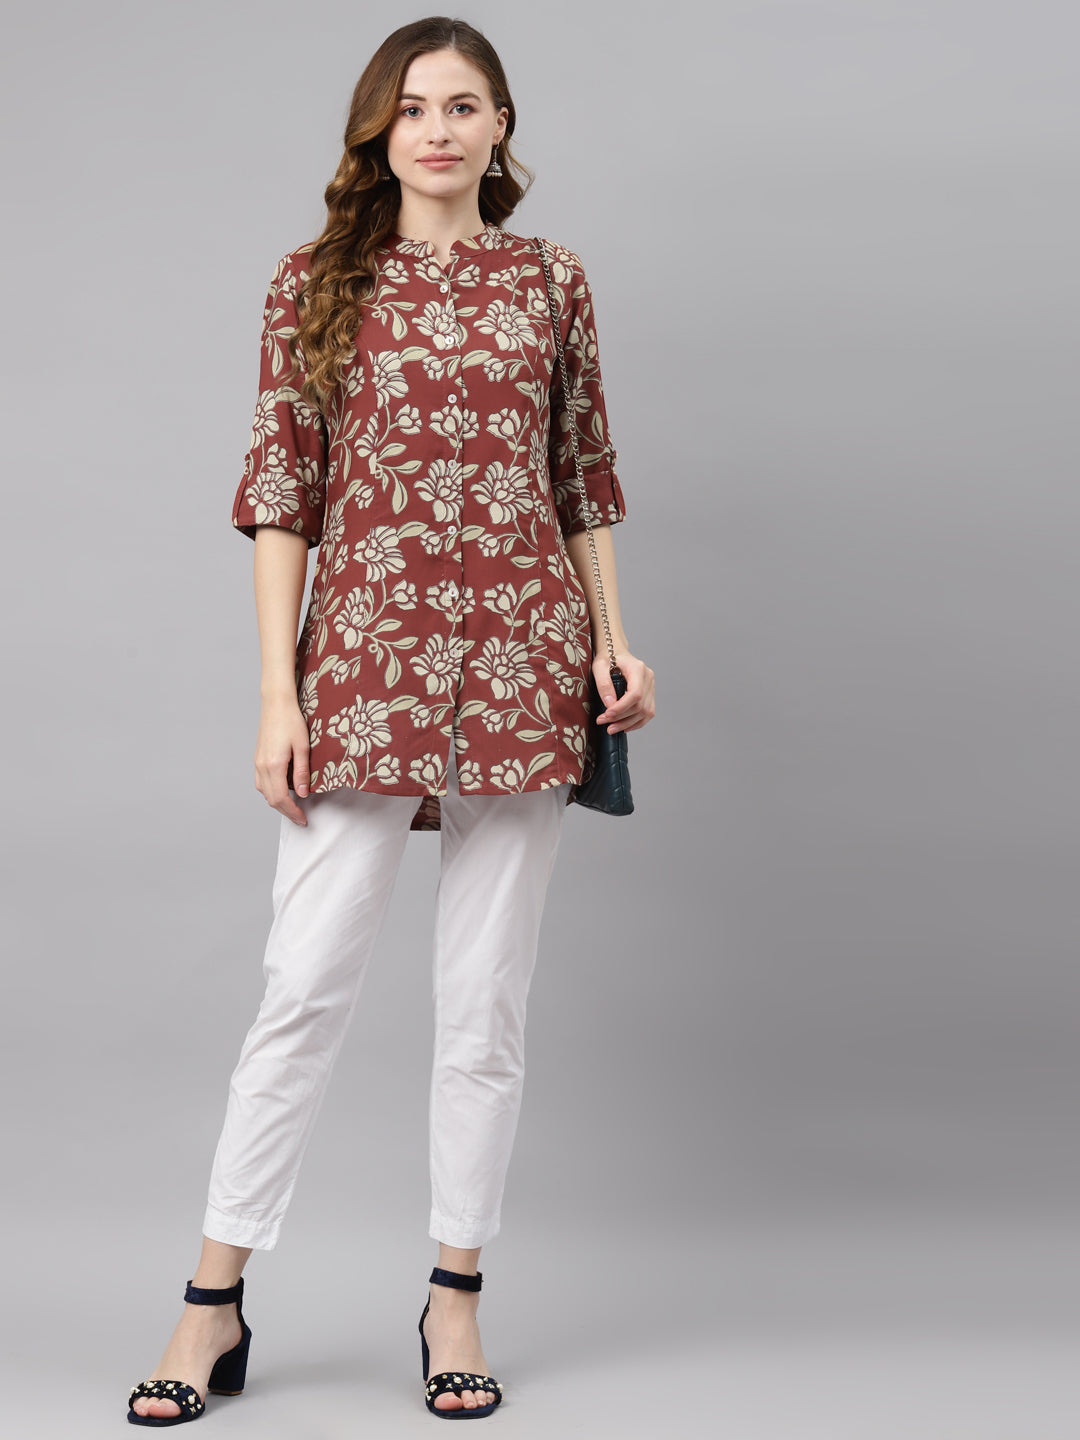 Women's Maroon Floral Rayon Top - Noz2Toz